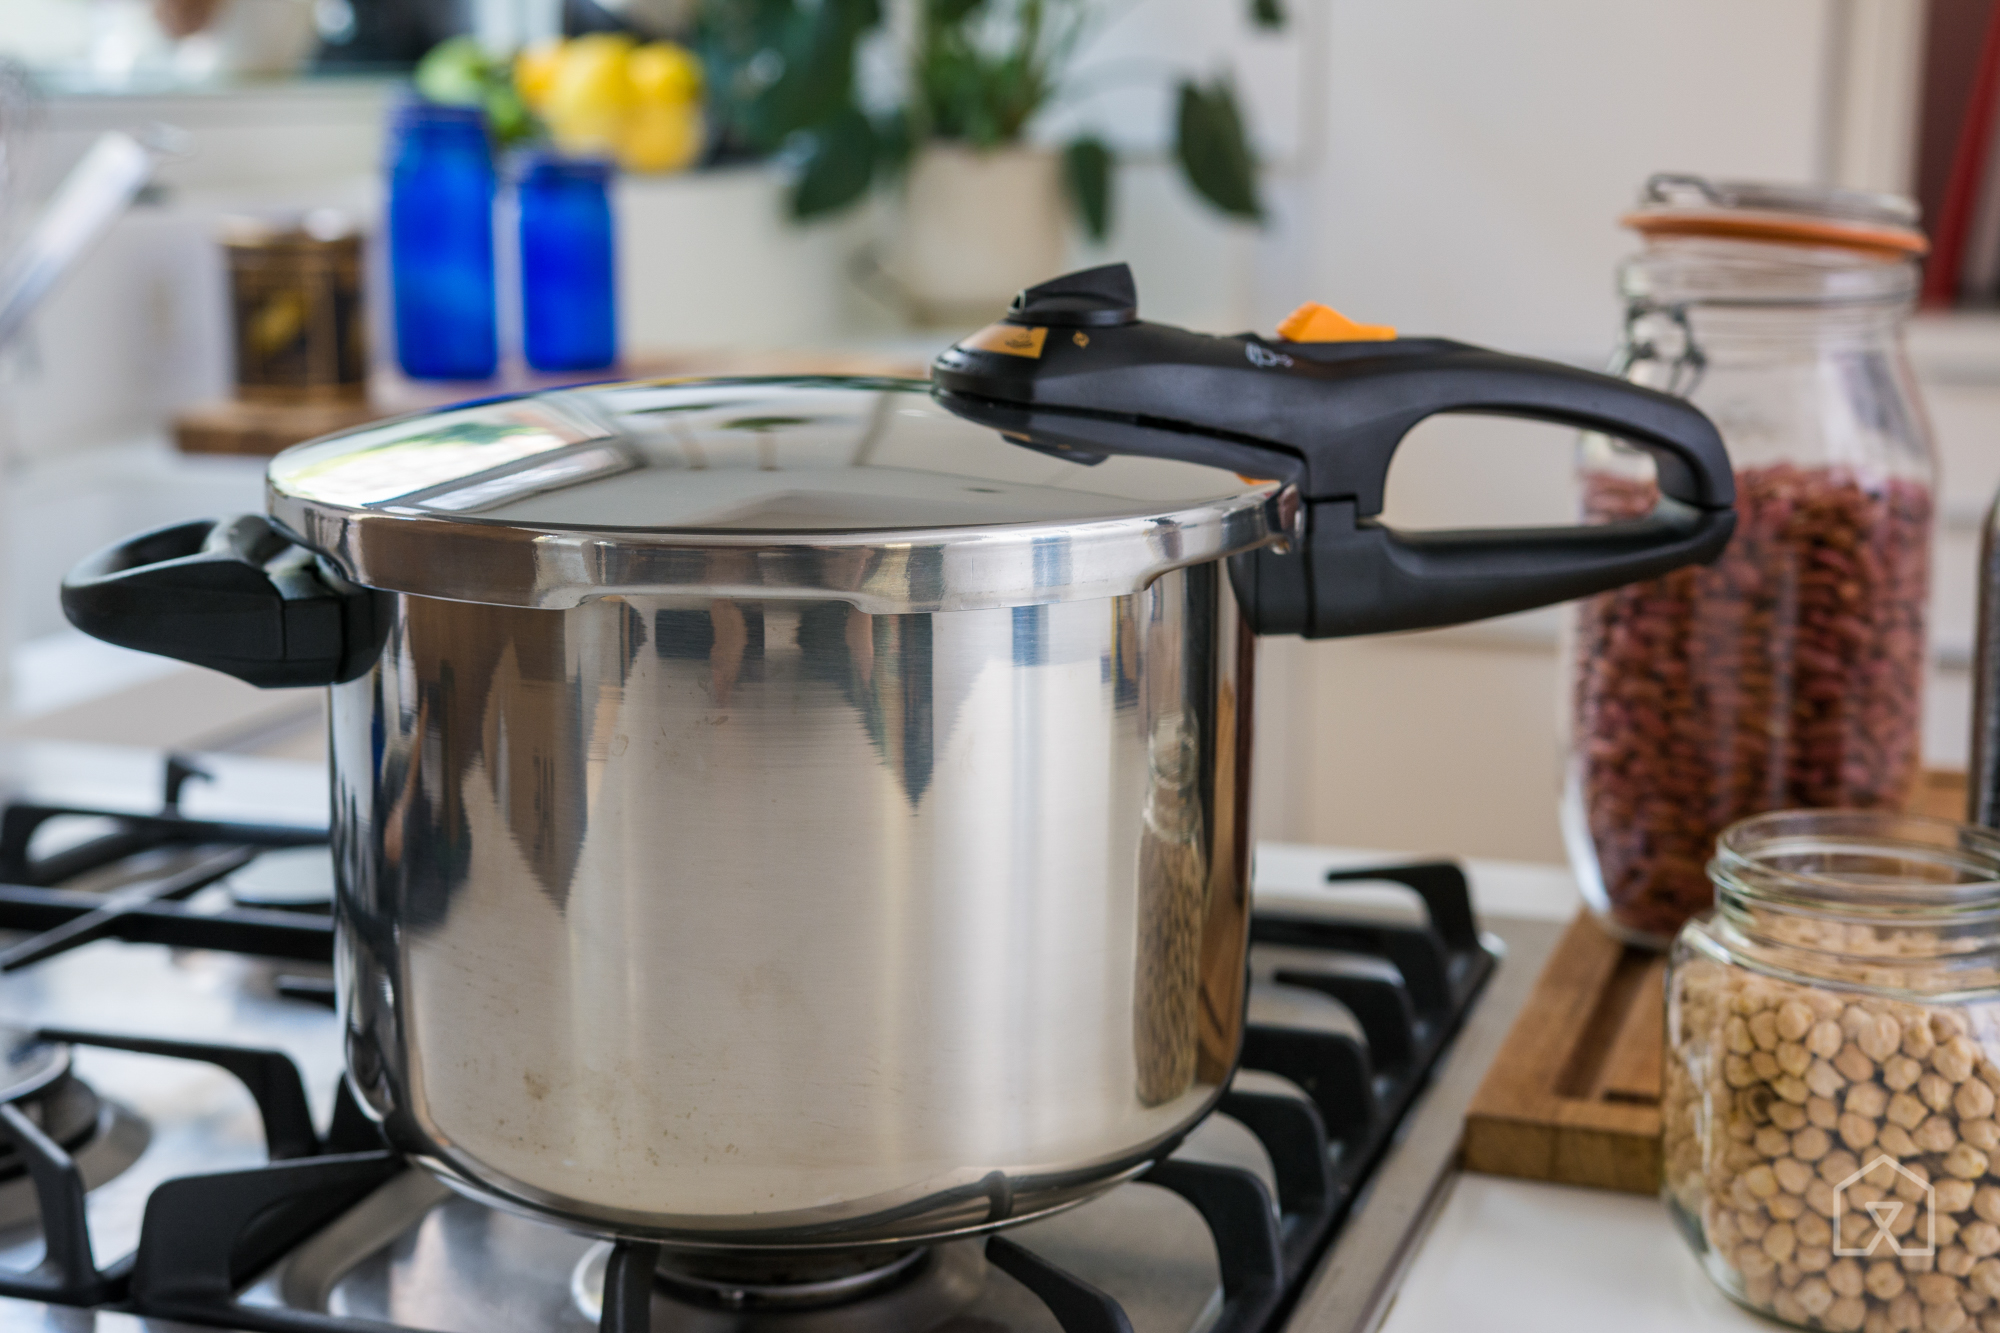 https://foodly.tn/wp-content/uploads/2021/08/What-is-the-best-pressure-cooker.jpg